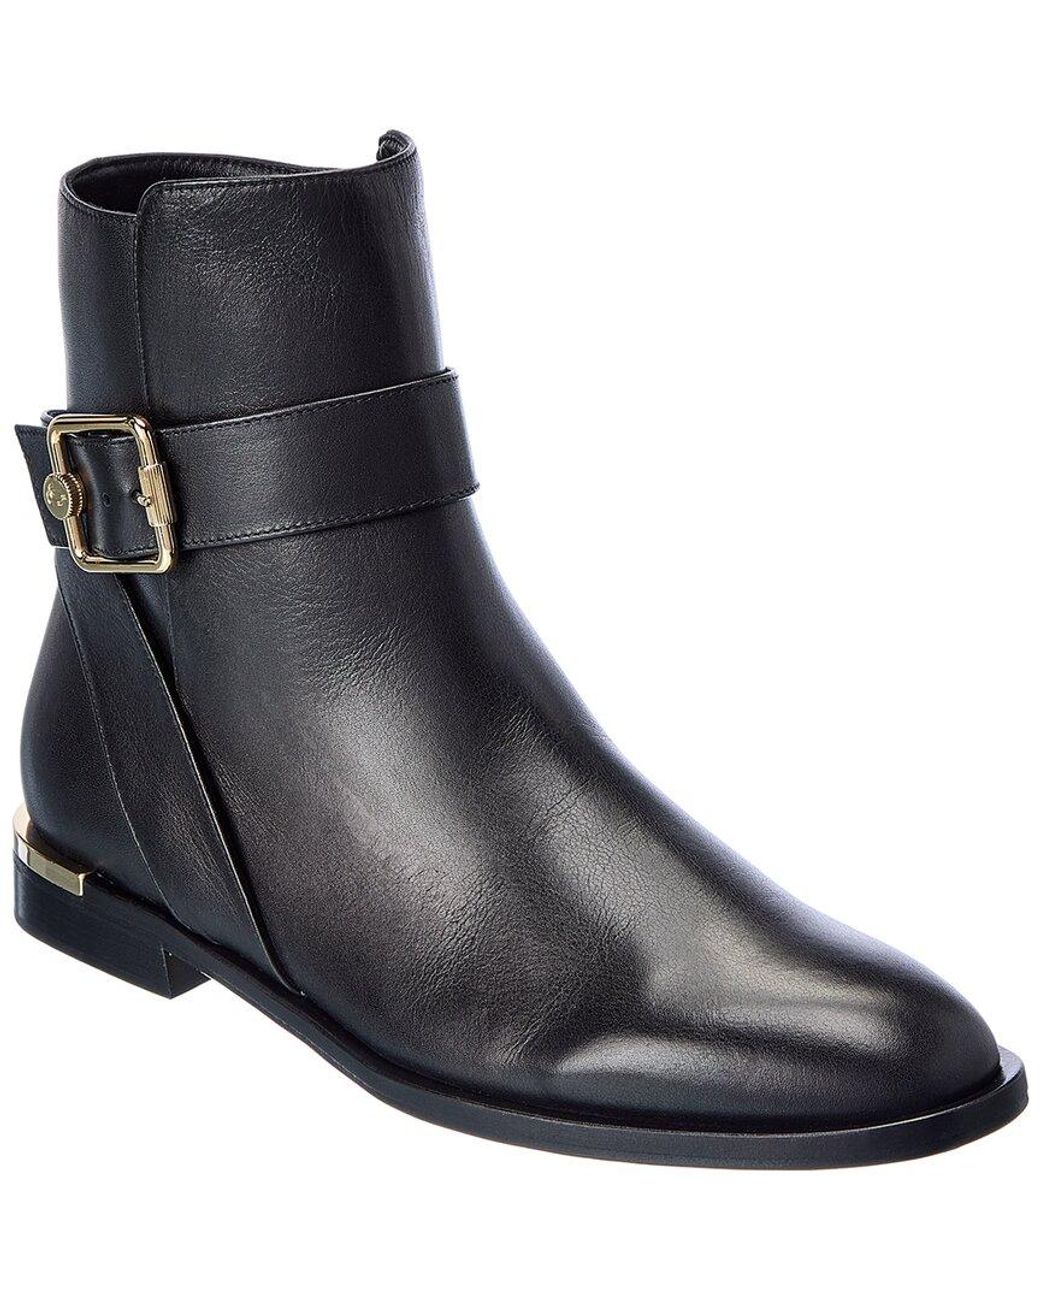 Jimmy Choo Clarice Leather Bootie in Black | Lyst